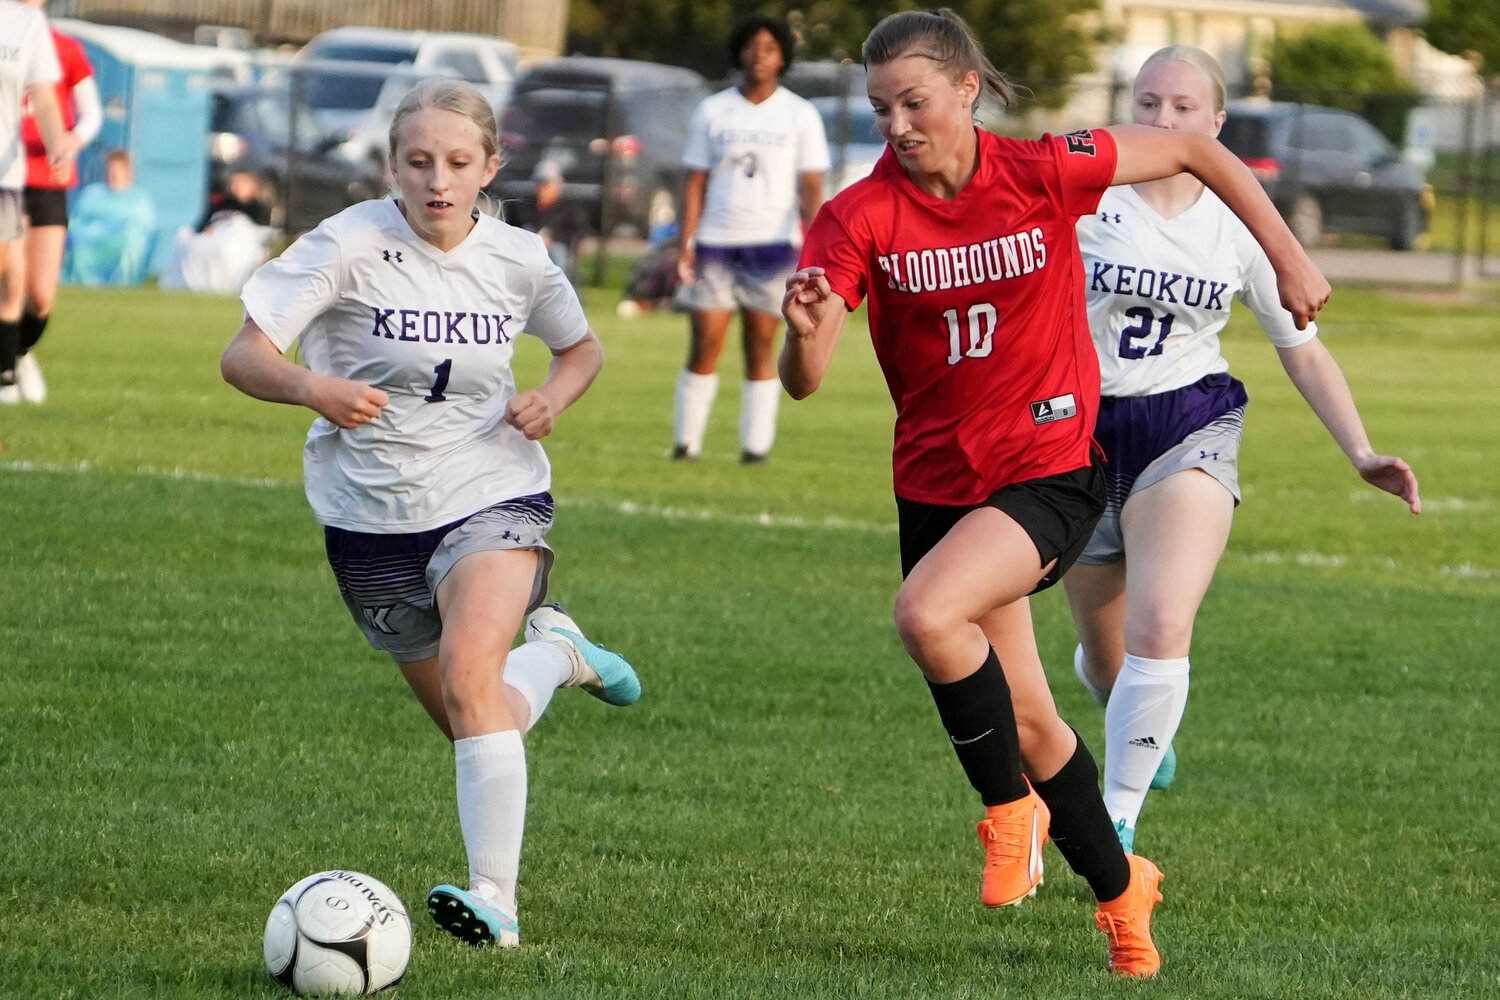 Fort Madison High School's Olivia Kraus (10) races Suzie Whitaker (1) for the ball during their Class 2A Region 5 quarterfinal game against Keokuk High School at Fort Madison's Baxter Sports Complex. Fort Madison won 6-0.